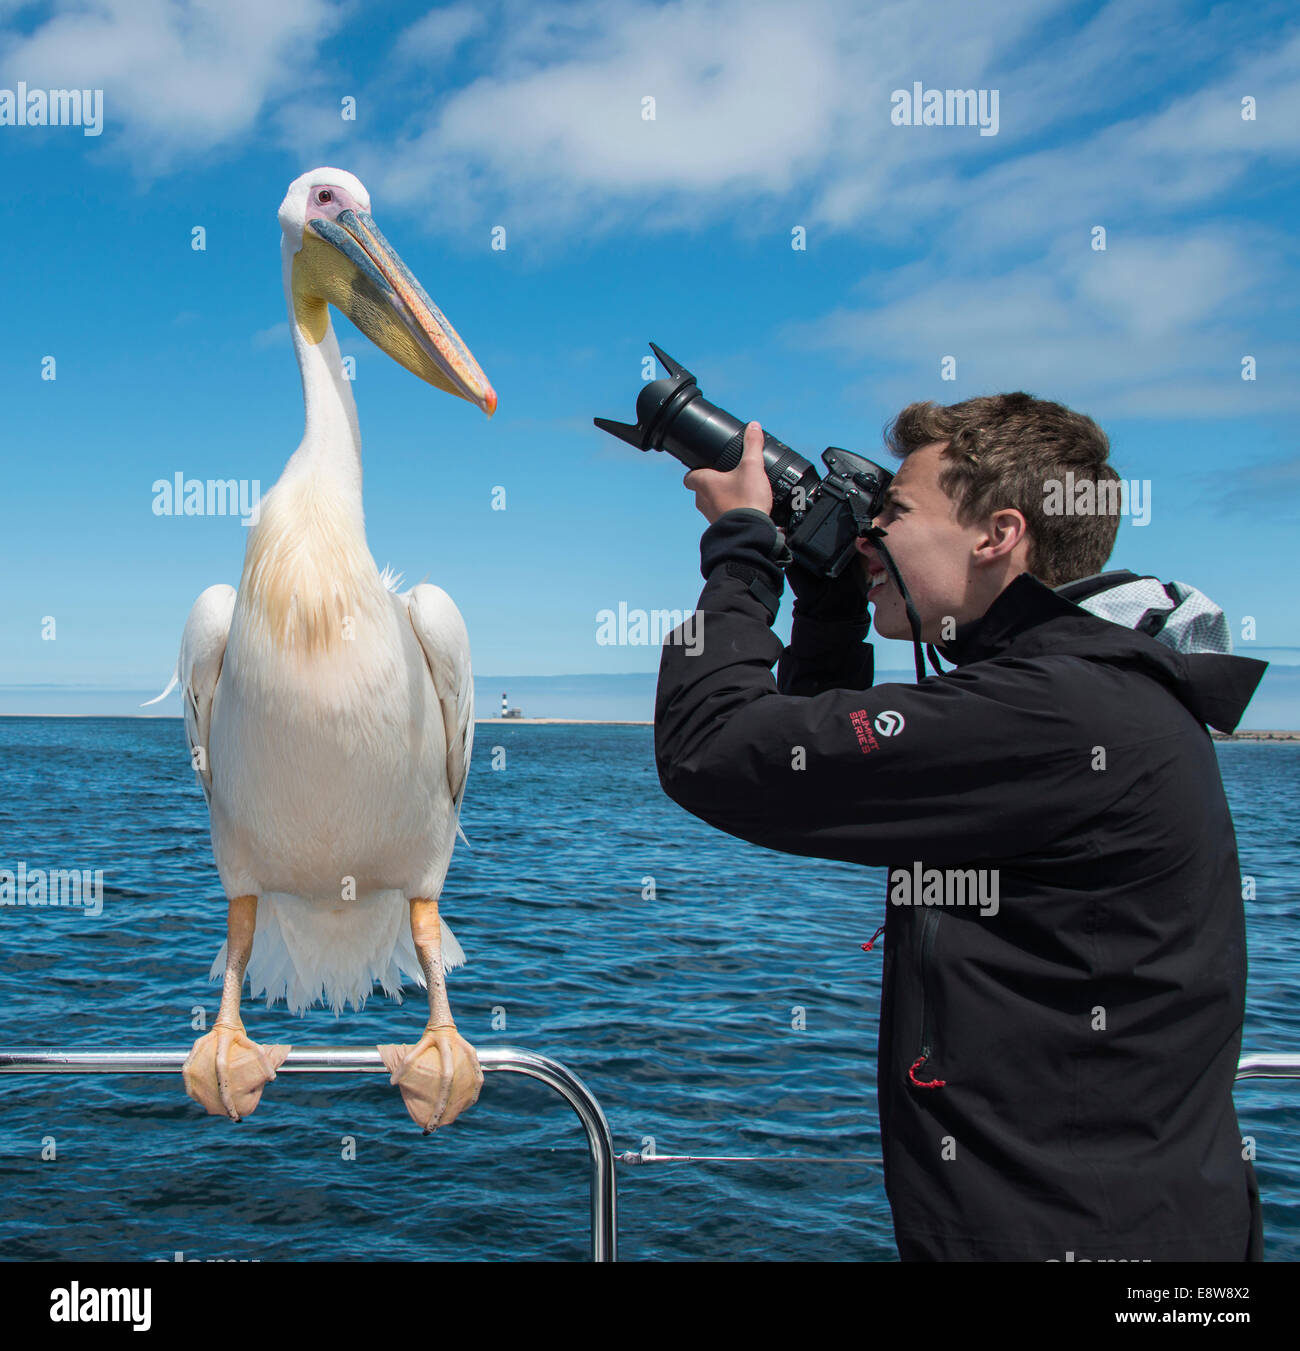 Teenager photographing a Great White Pelican (Pelecanus onocrotalus) on a boat, Walvis Bay, Namibia Stock Photo